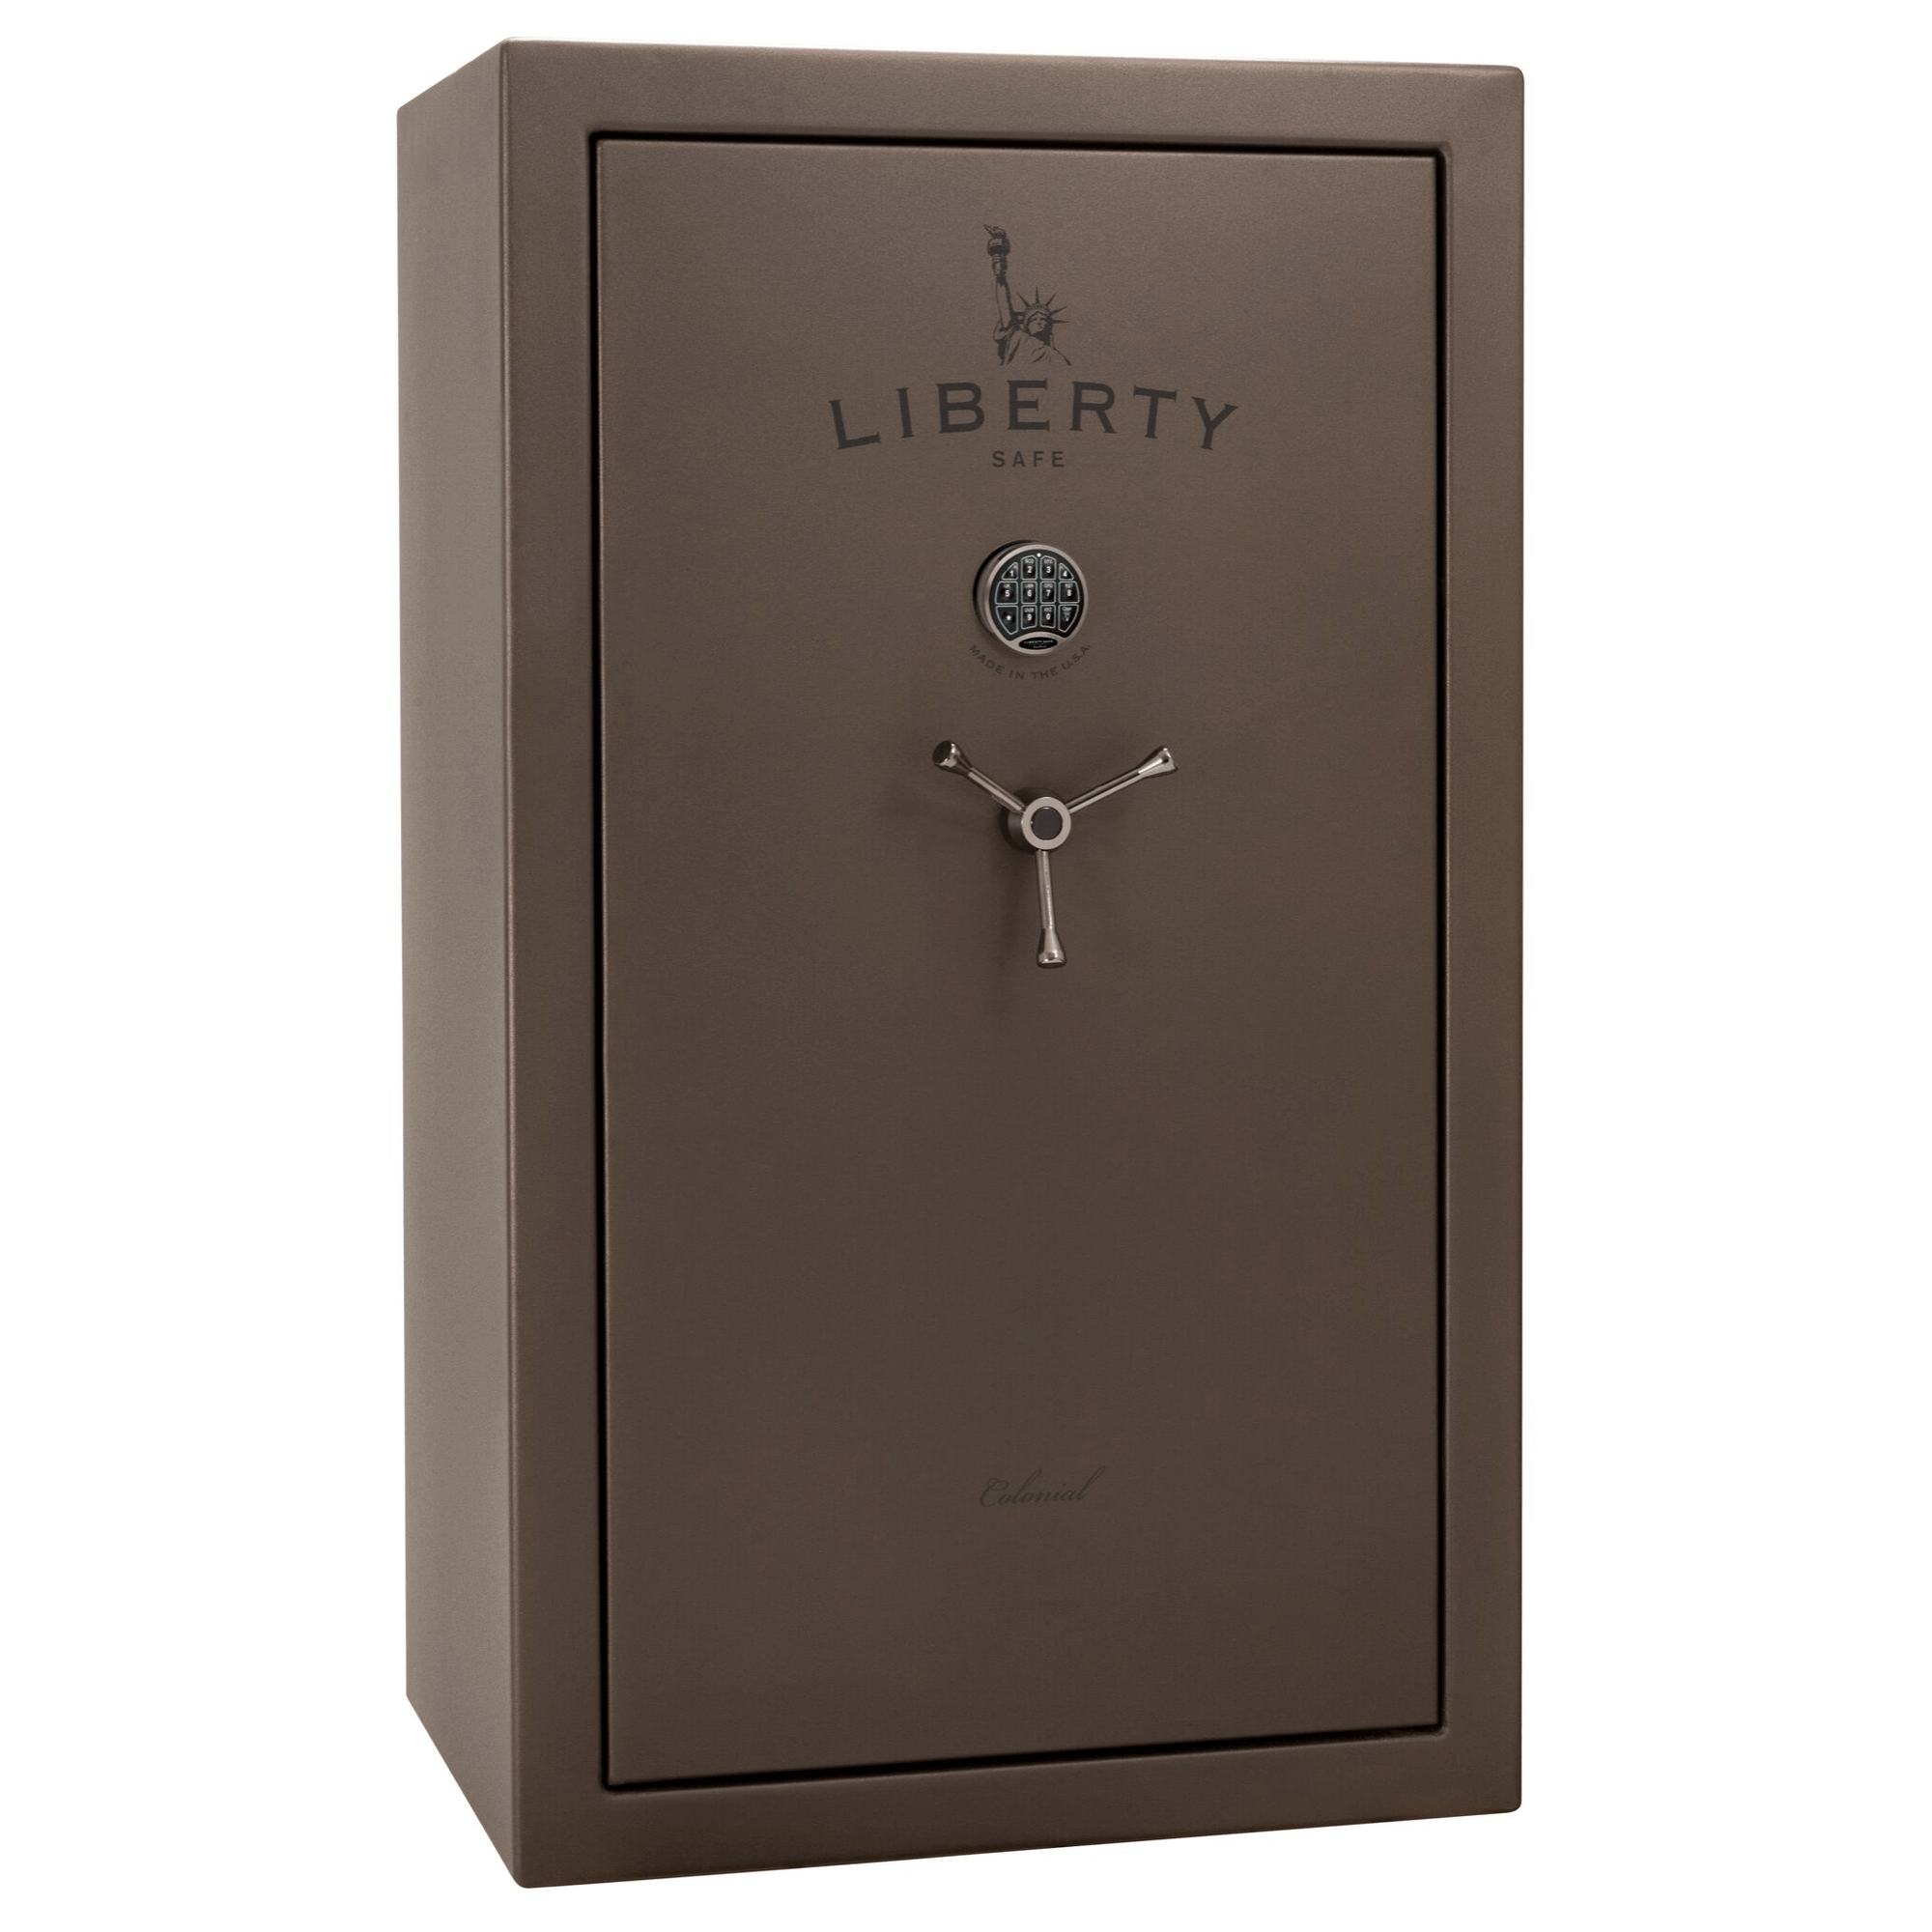 Colonial | 30 | Bronze Textured | Level 4 Security | 75 Minute Fire Protection | Liberty Safe Norcal.